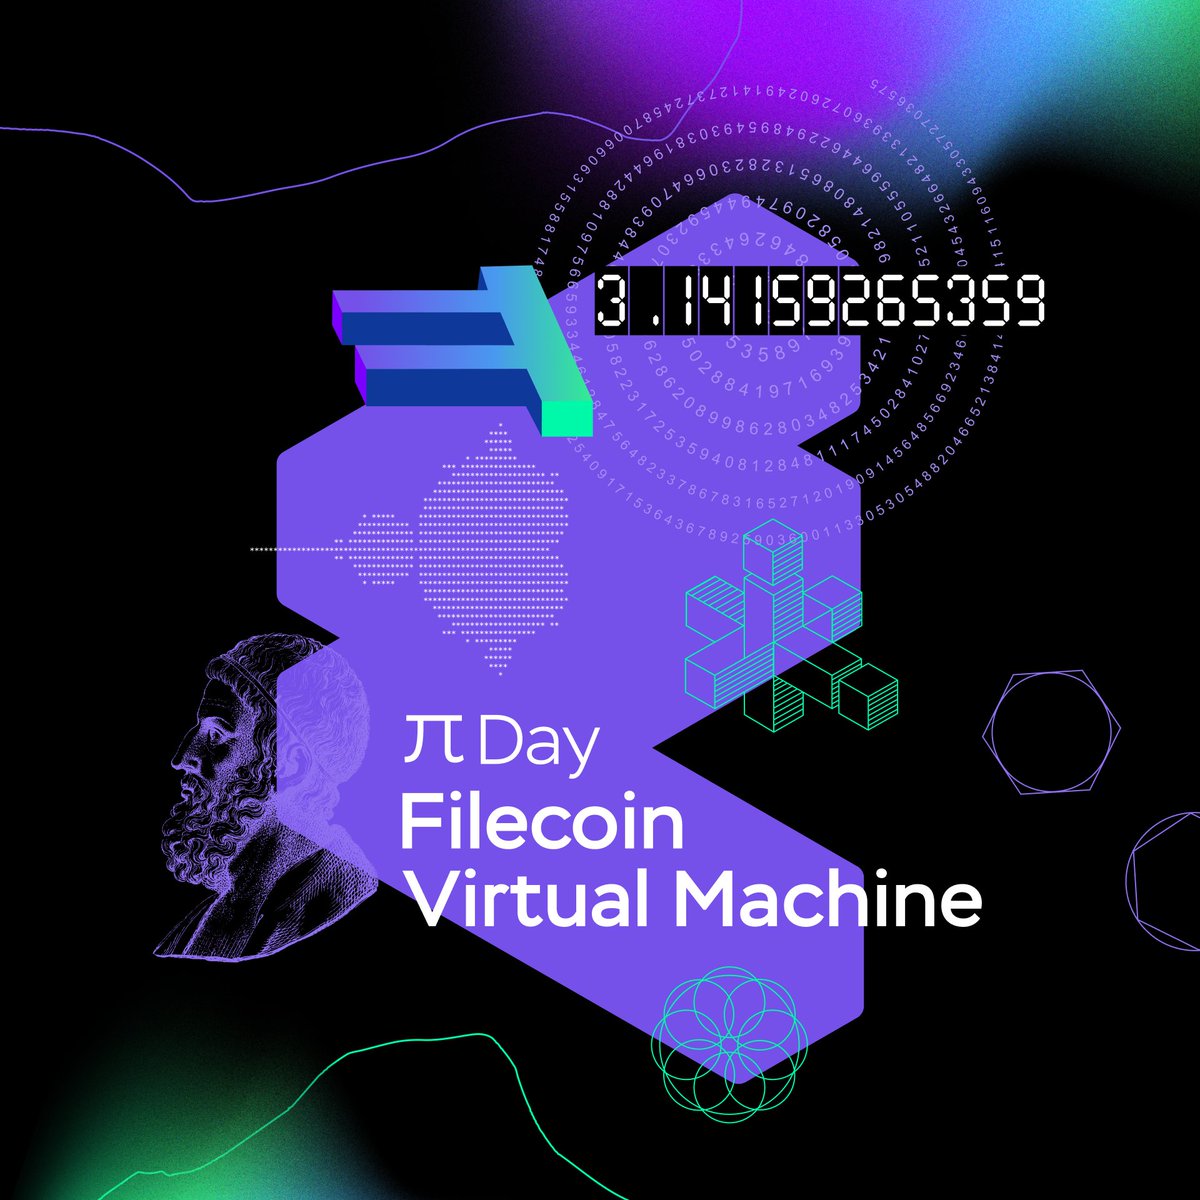 🎉 Today, the Filecoin community is proud to announce the successful launch of the #FVM! As of 3.14PM UTC, the Filecoin blockchain now supports smart contracts & user programmability, unlocking the enormous potential of an open data economy. Learn more: filecoin.io/blog/posts/fvm…